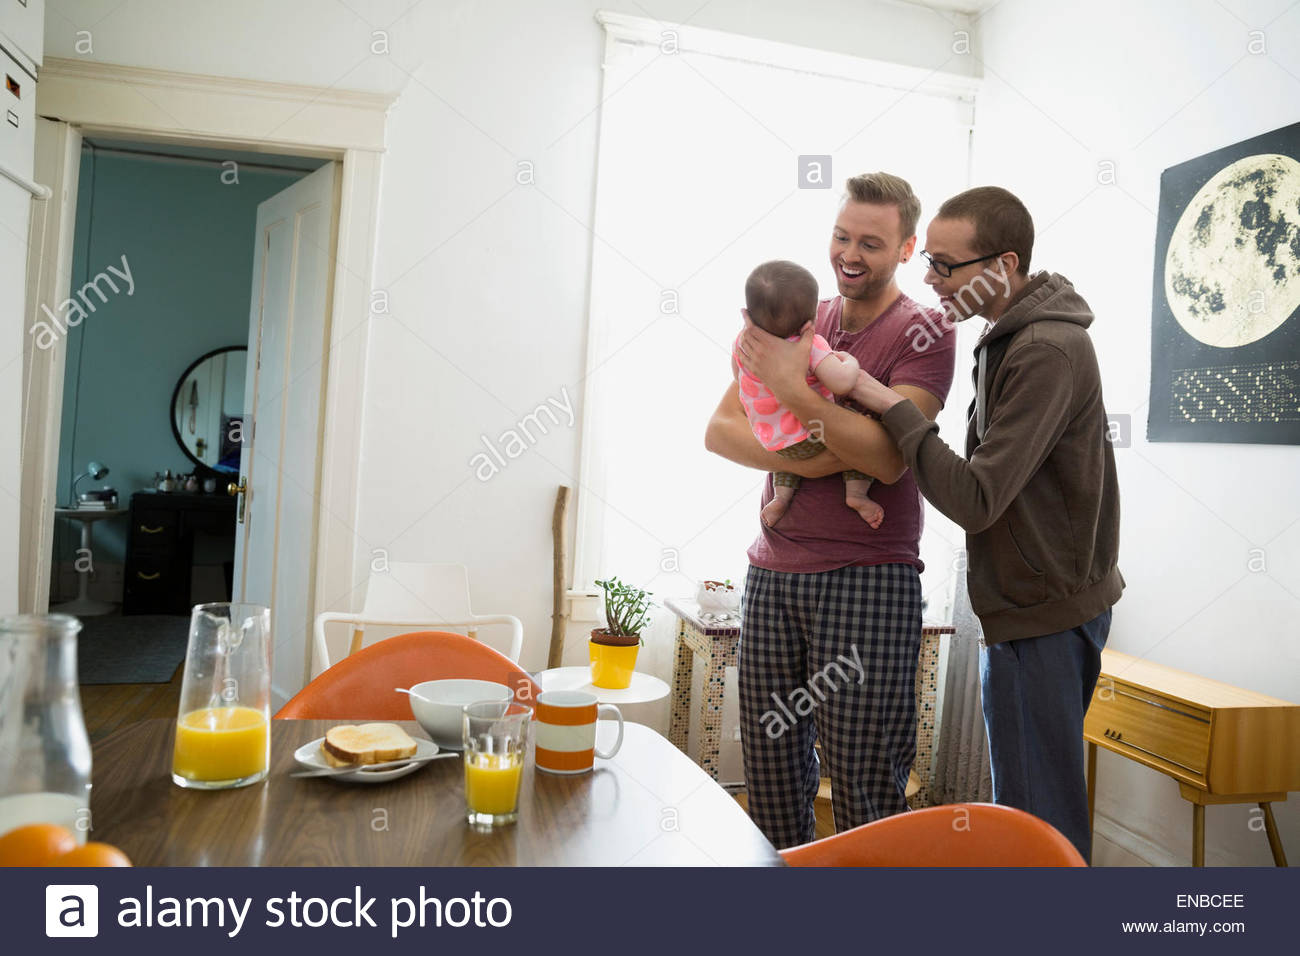 Homosexual couple with baby daughter at window Stock Photo